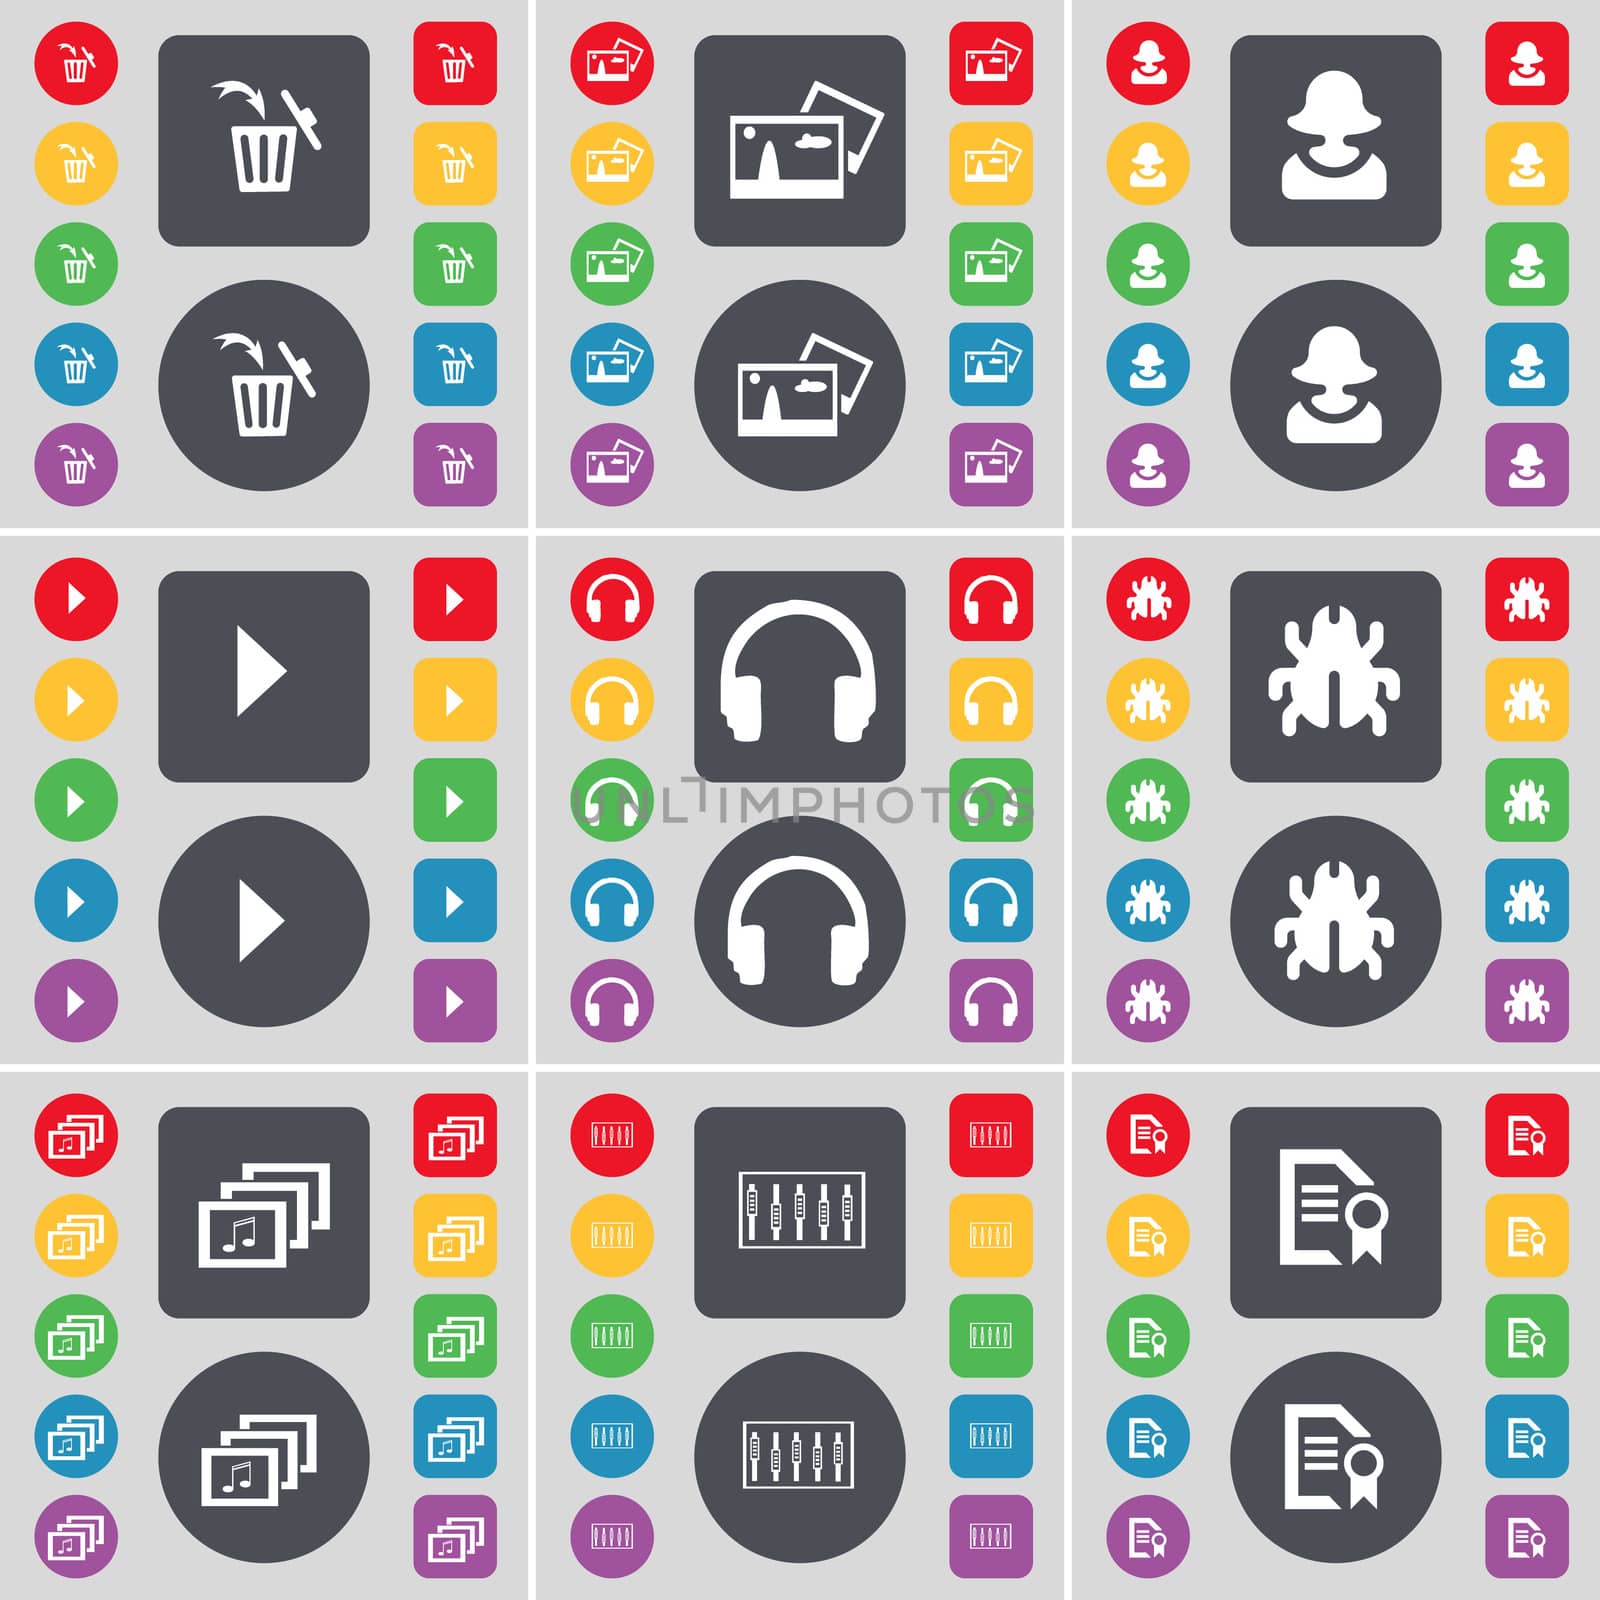 Trash can, Picture, Avatar, Media play, Headphones, Bug, Gallery, Equalizer, Text file icon symbol. A large set of flat, colored buttons for your design.  by serhii_lohvyniuk